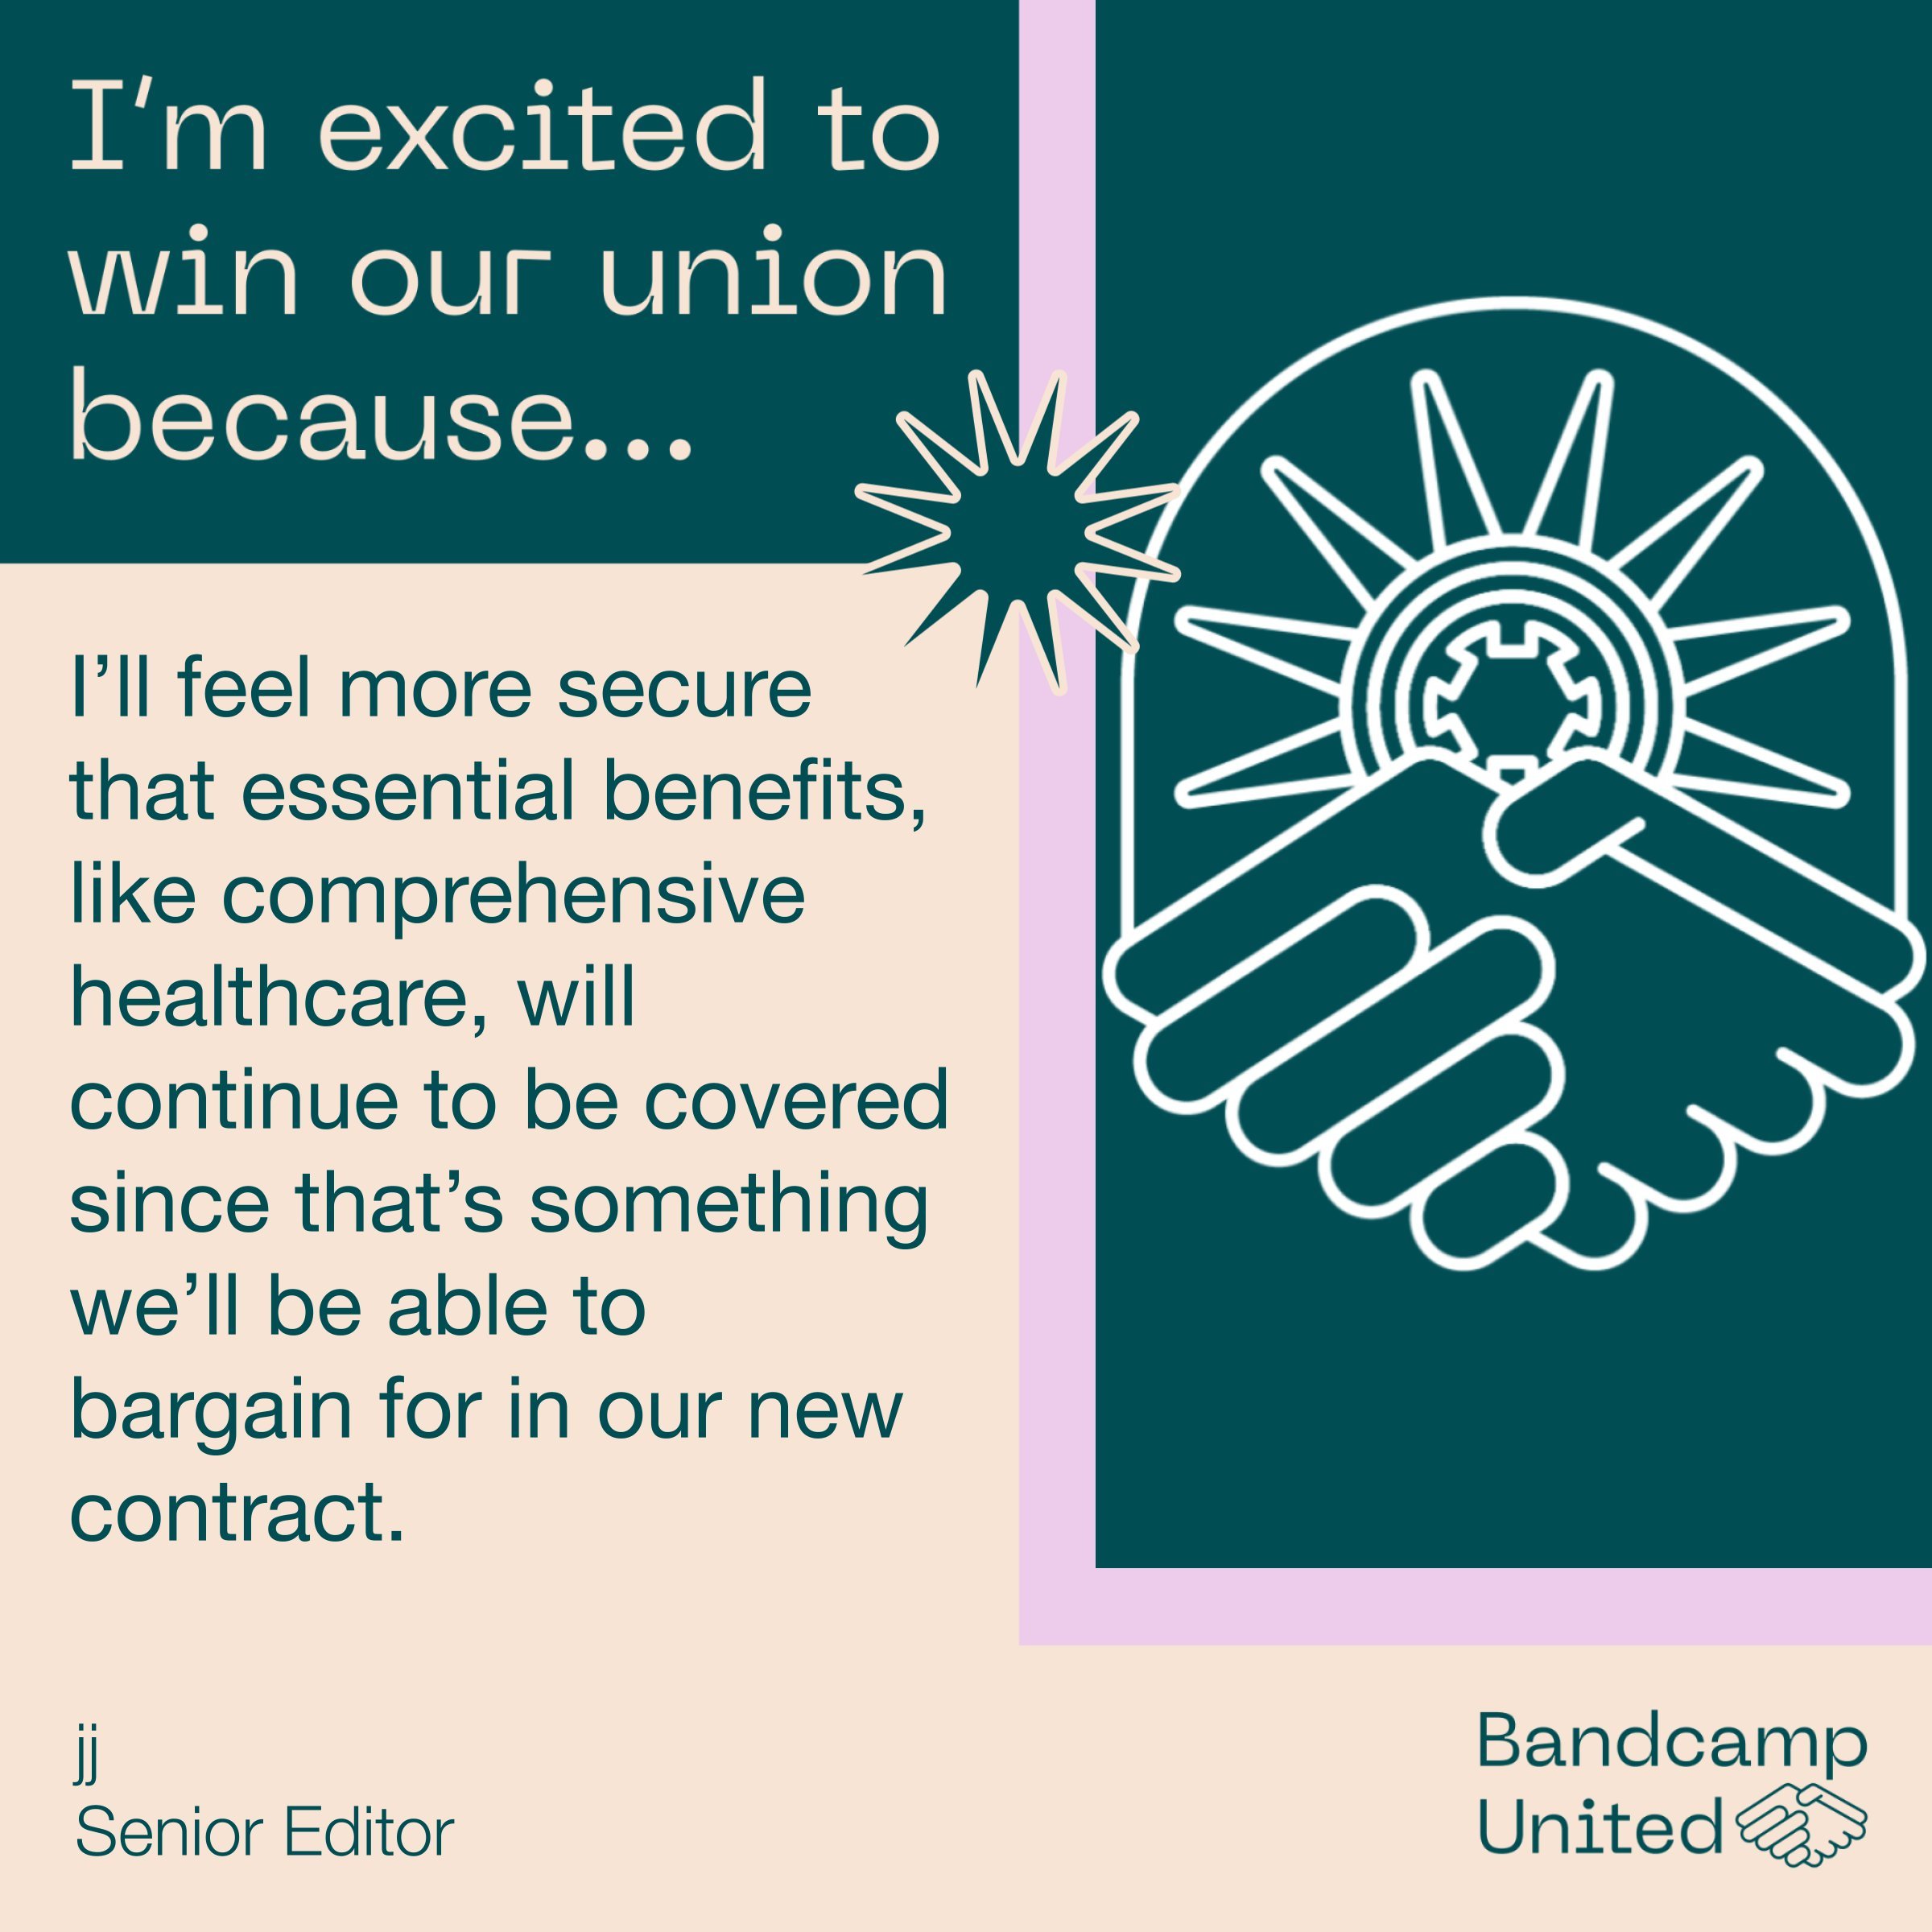 bandcamp united worker quotes 8.jpg